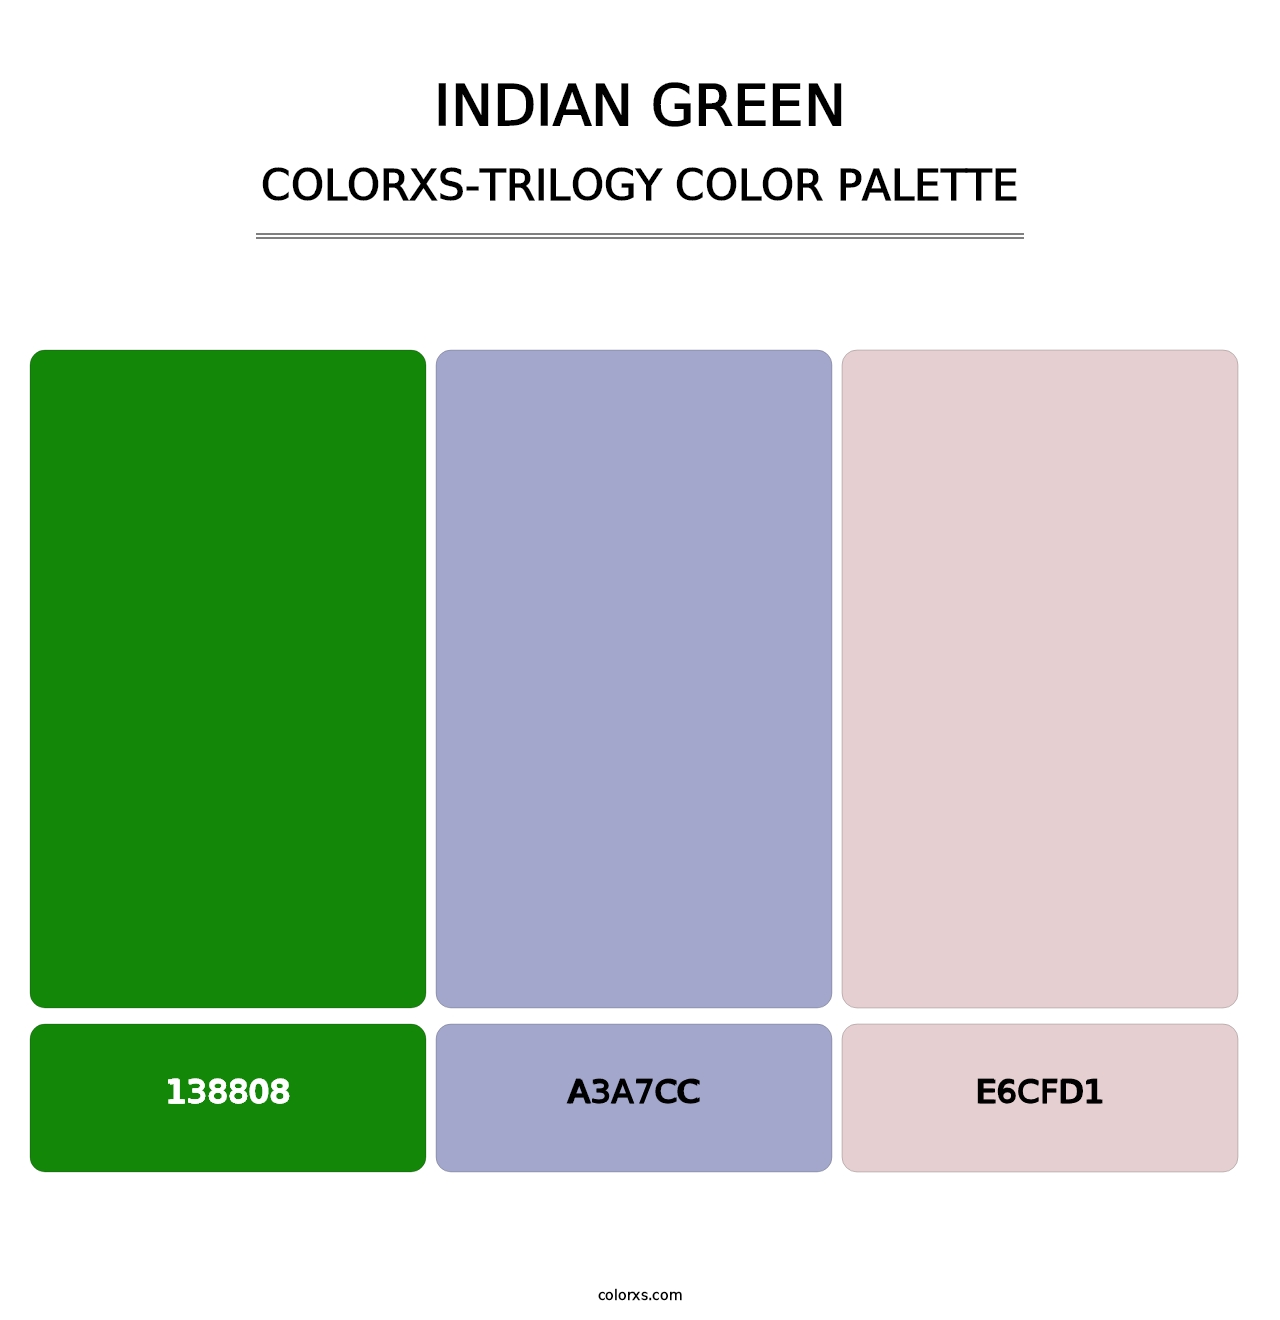 Indian Green - Colorxs Trilogy Palette